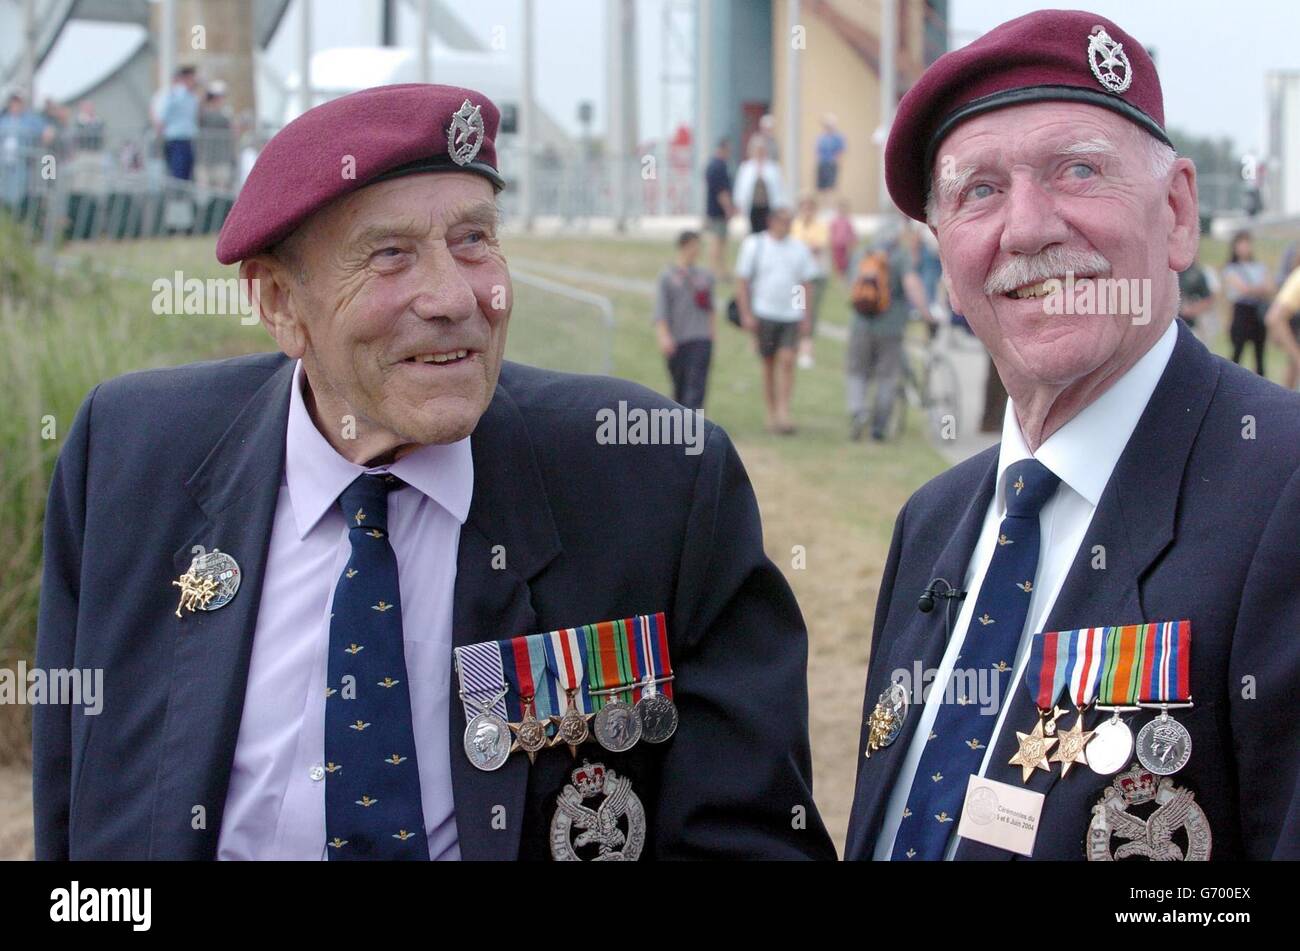 Glider pilot Geoff Barkway and, right, co-pilot/navigator Peter Boyle reminisce at the Pegasus Bridge, on the eve of the 60th anniversary of the D-Day landings. The pair crewed one of six gliders which landed at the bridge as part of the allied invasion in 1944. Stock Photo